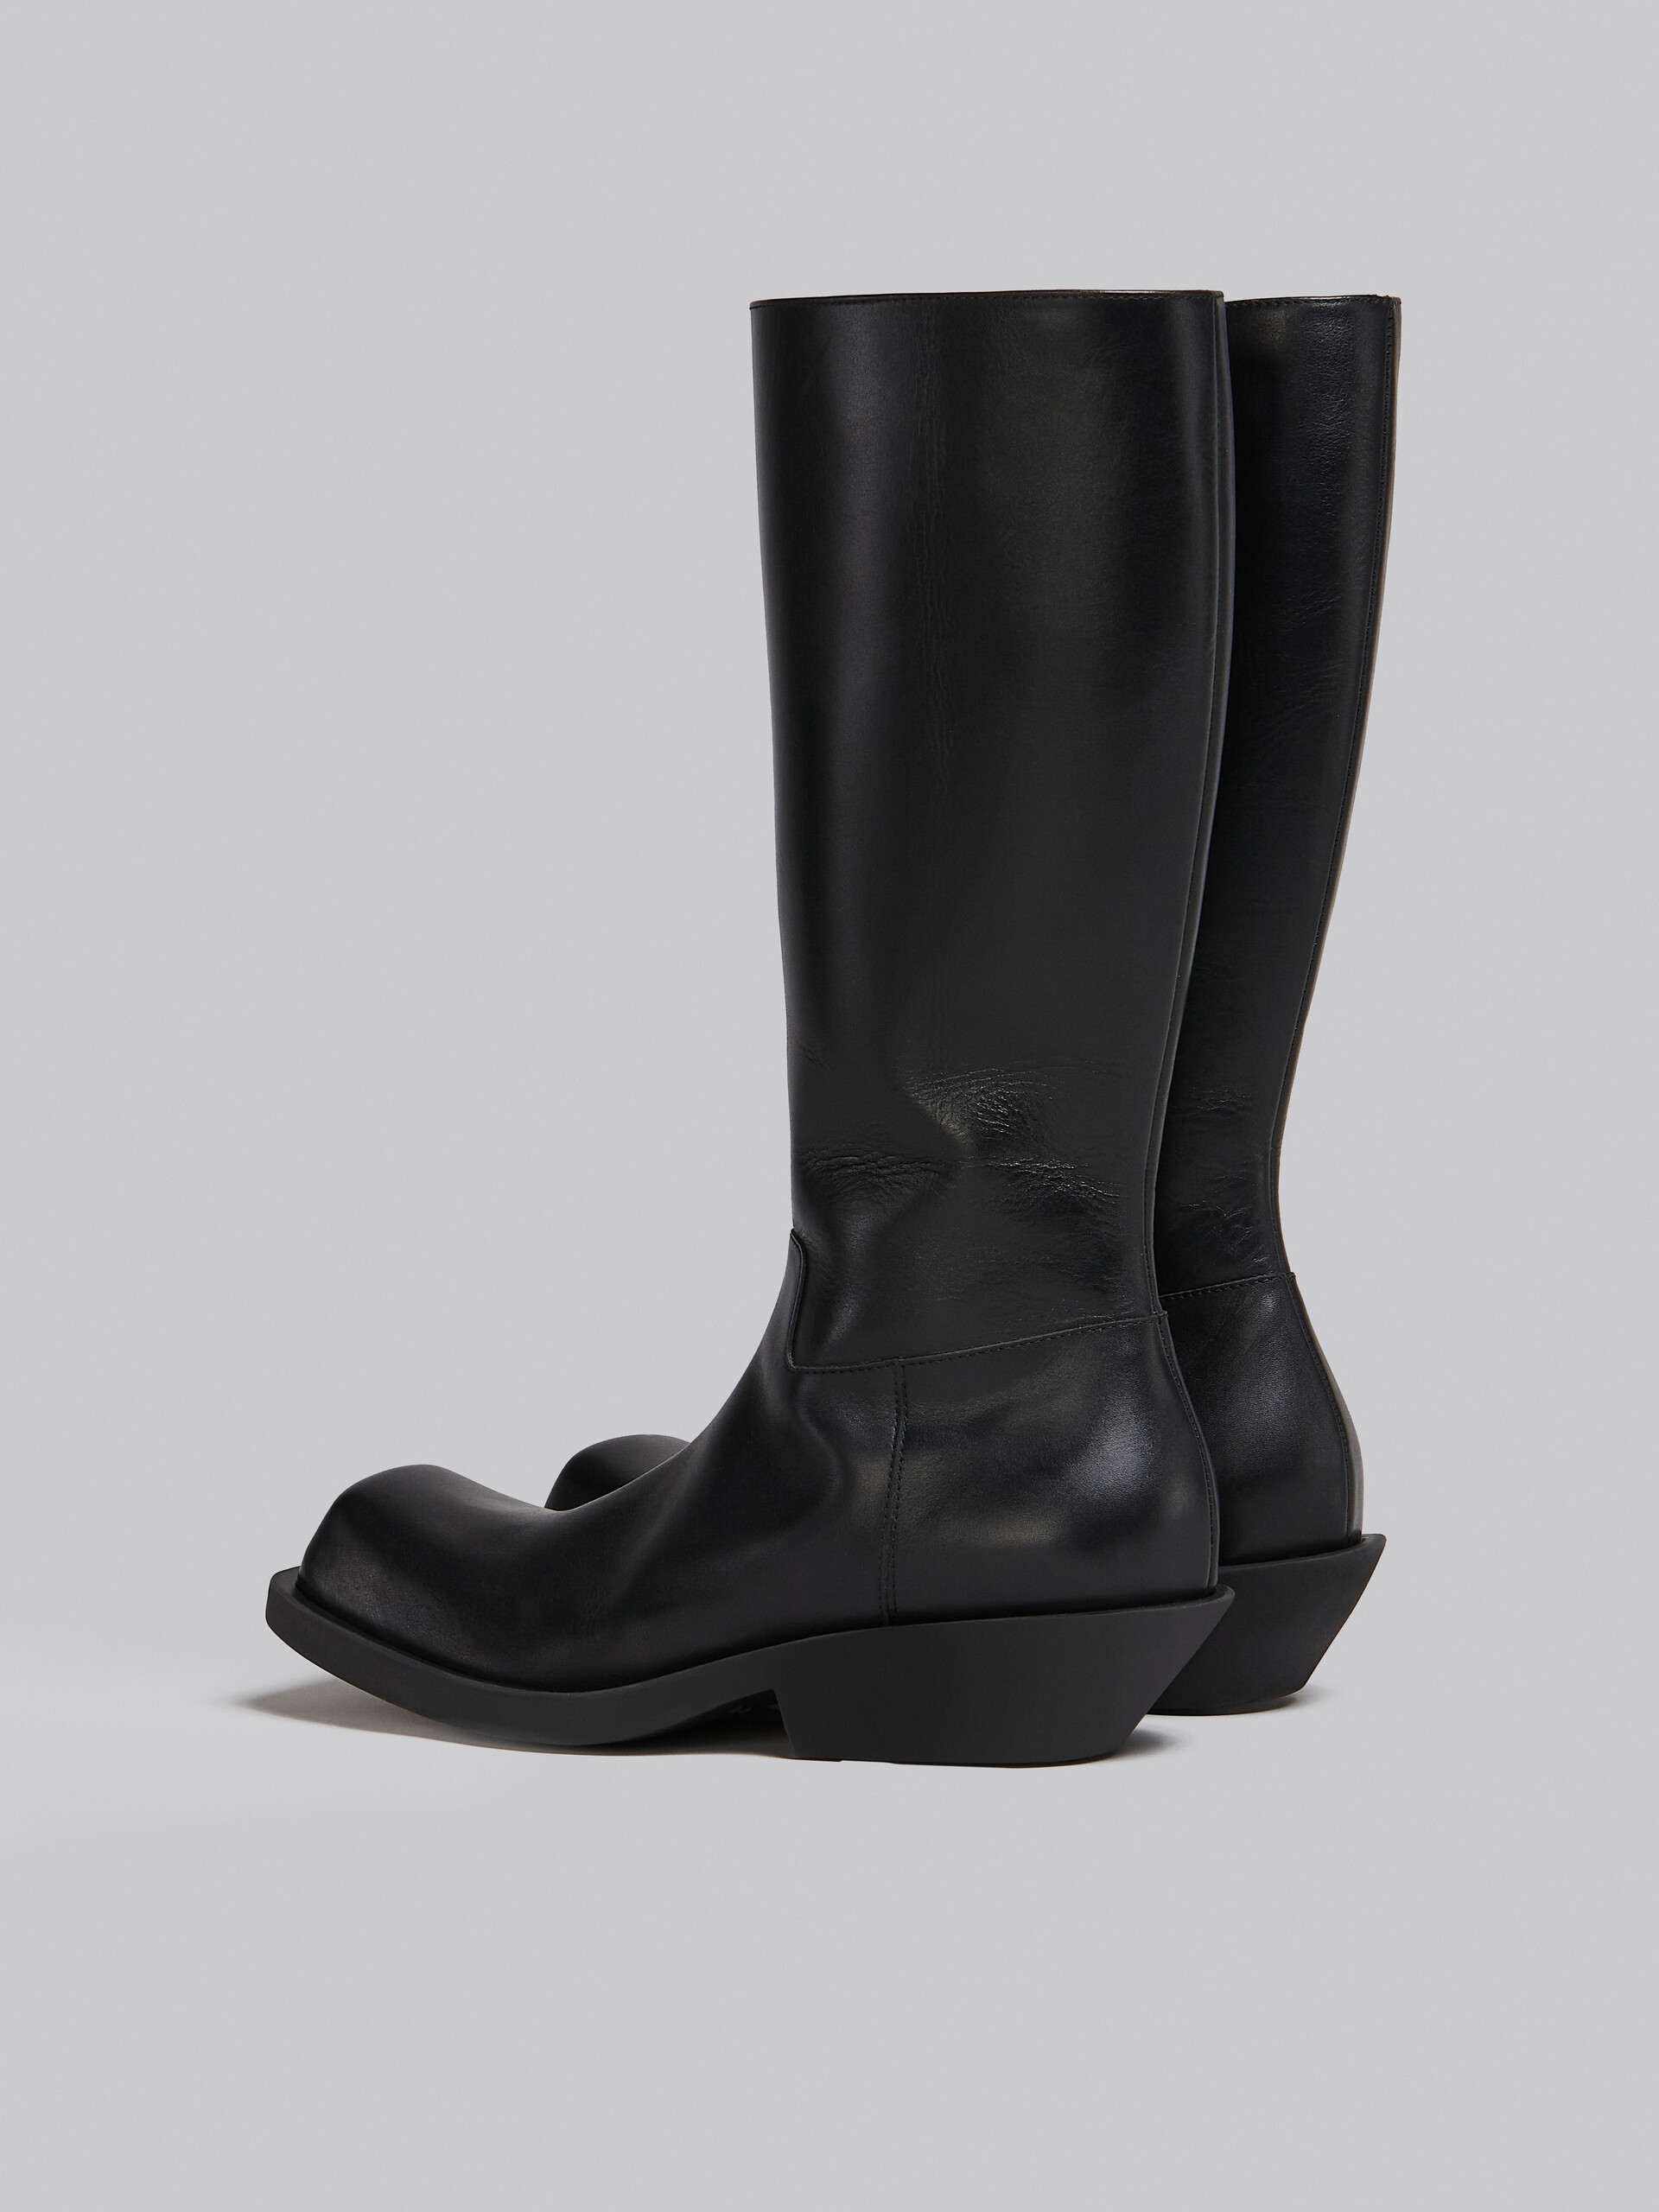 Black leather boot - Boots - Image 3